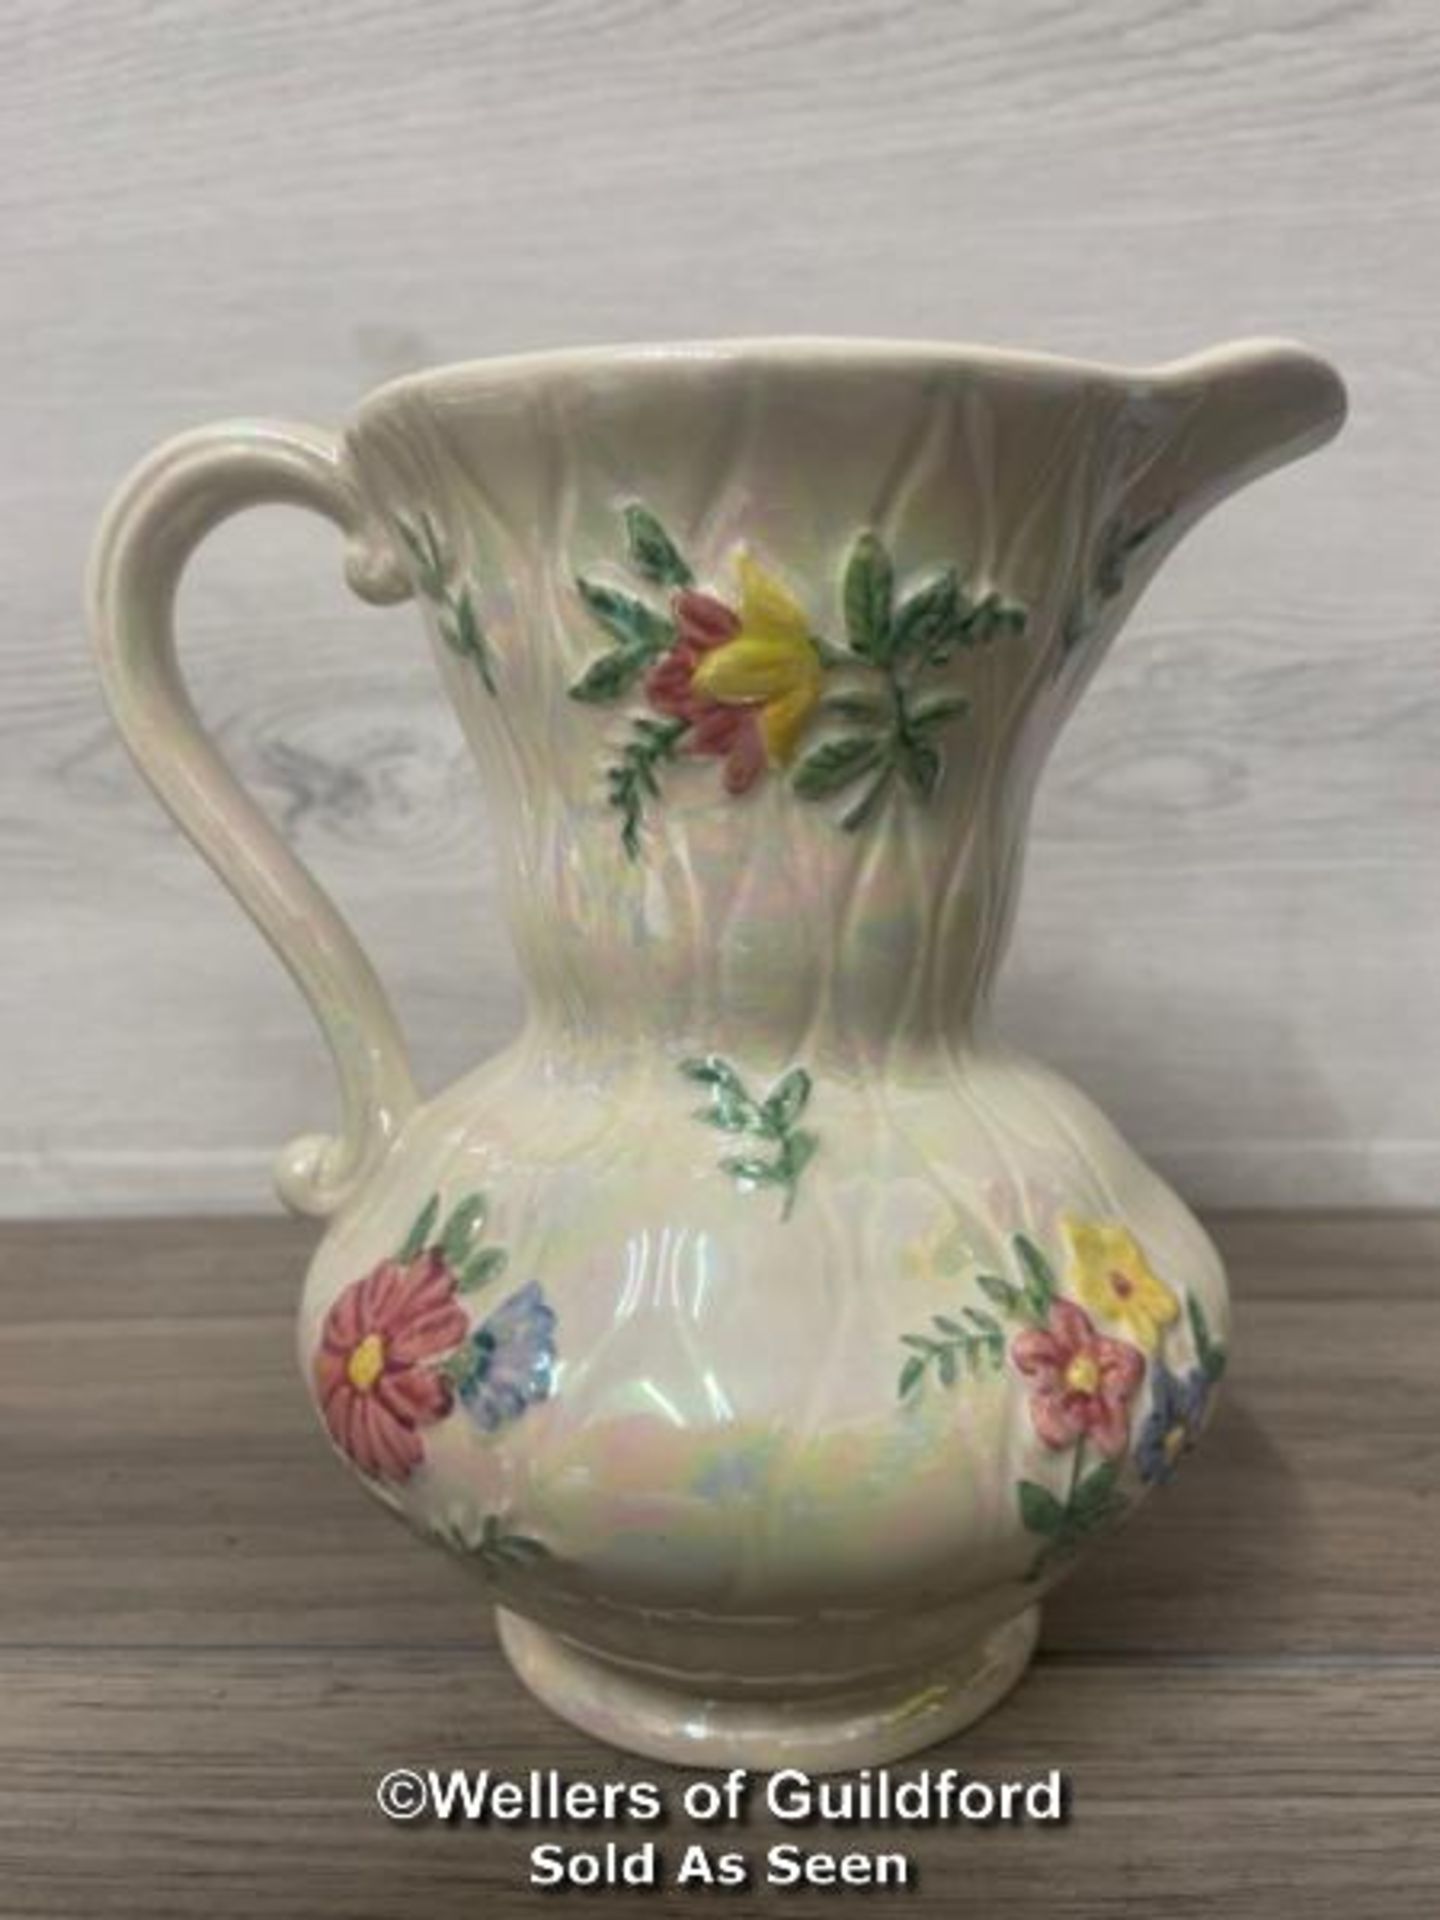 MAILING WARE LUSTRE JUG, 9" TALL IN EXCELLENT CONDITION - Image 2 of 3